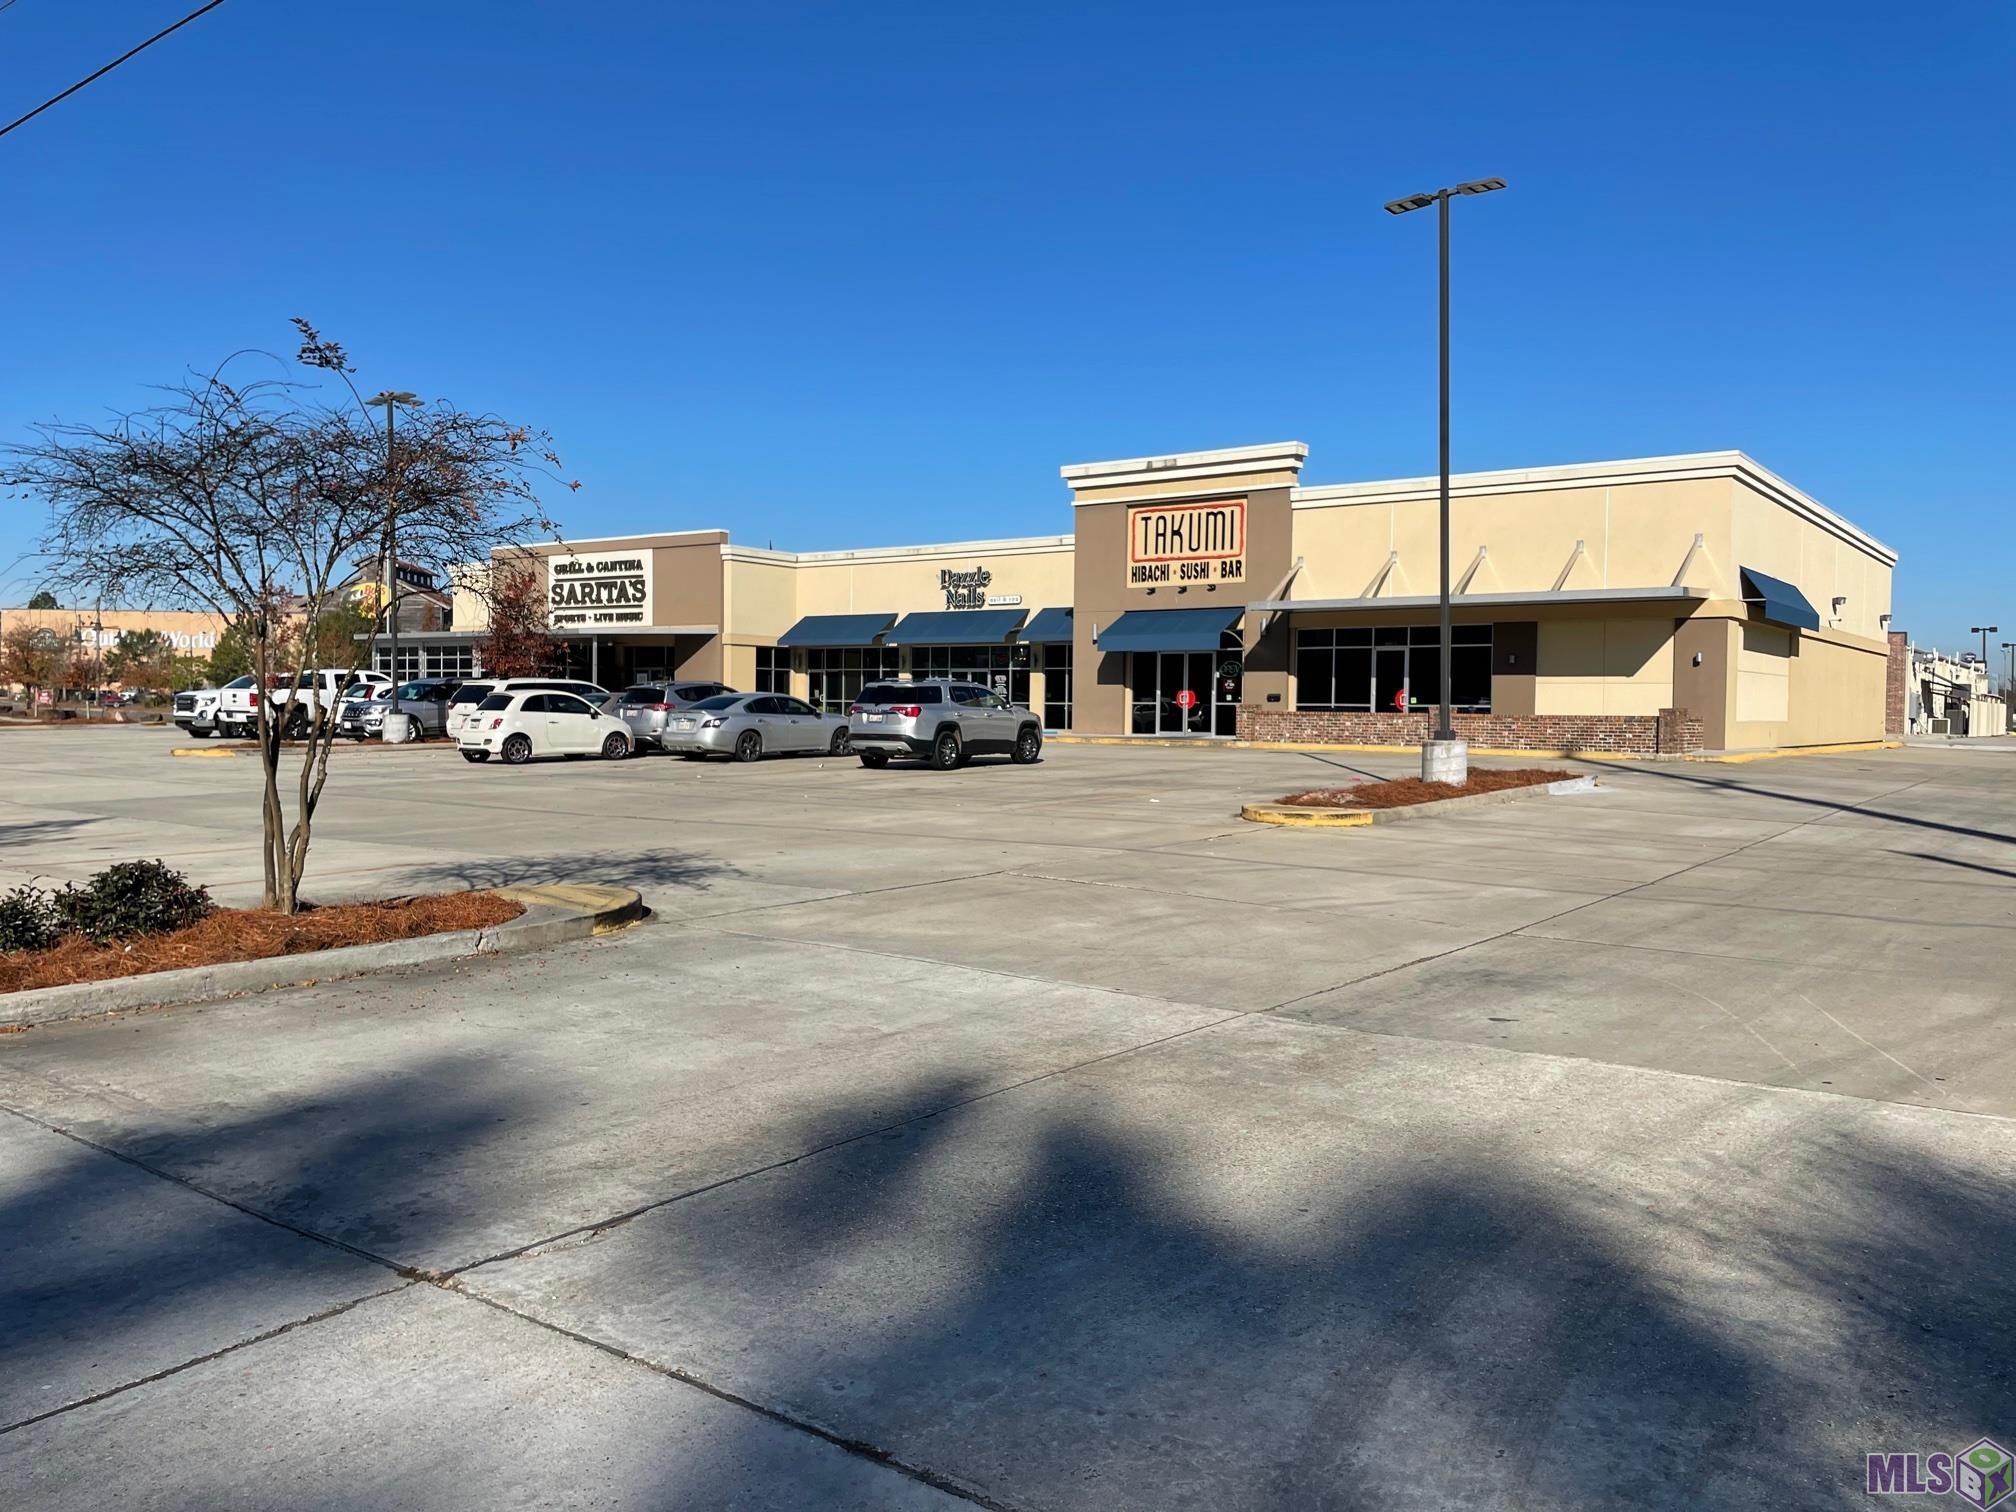 100% leased Class “A” NNN retail plaza available for purchase at 7% CAP Rate. Located in a Bass Pro development in fast growing Denham Springs Louisiana, just 5 minutes from Greater Baton Rouge CBD. Current Tenant mix is Sarita’s Restaurant, Dazzle Nails